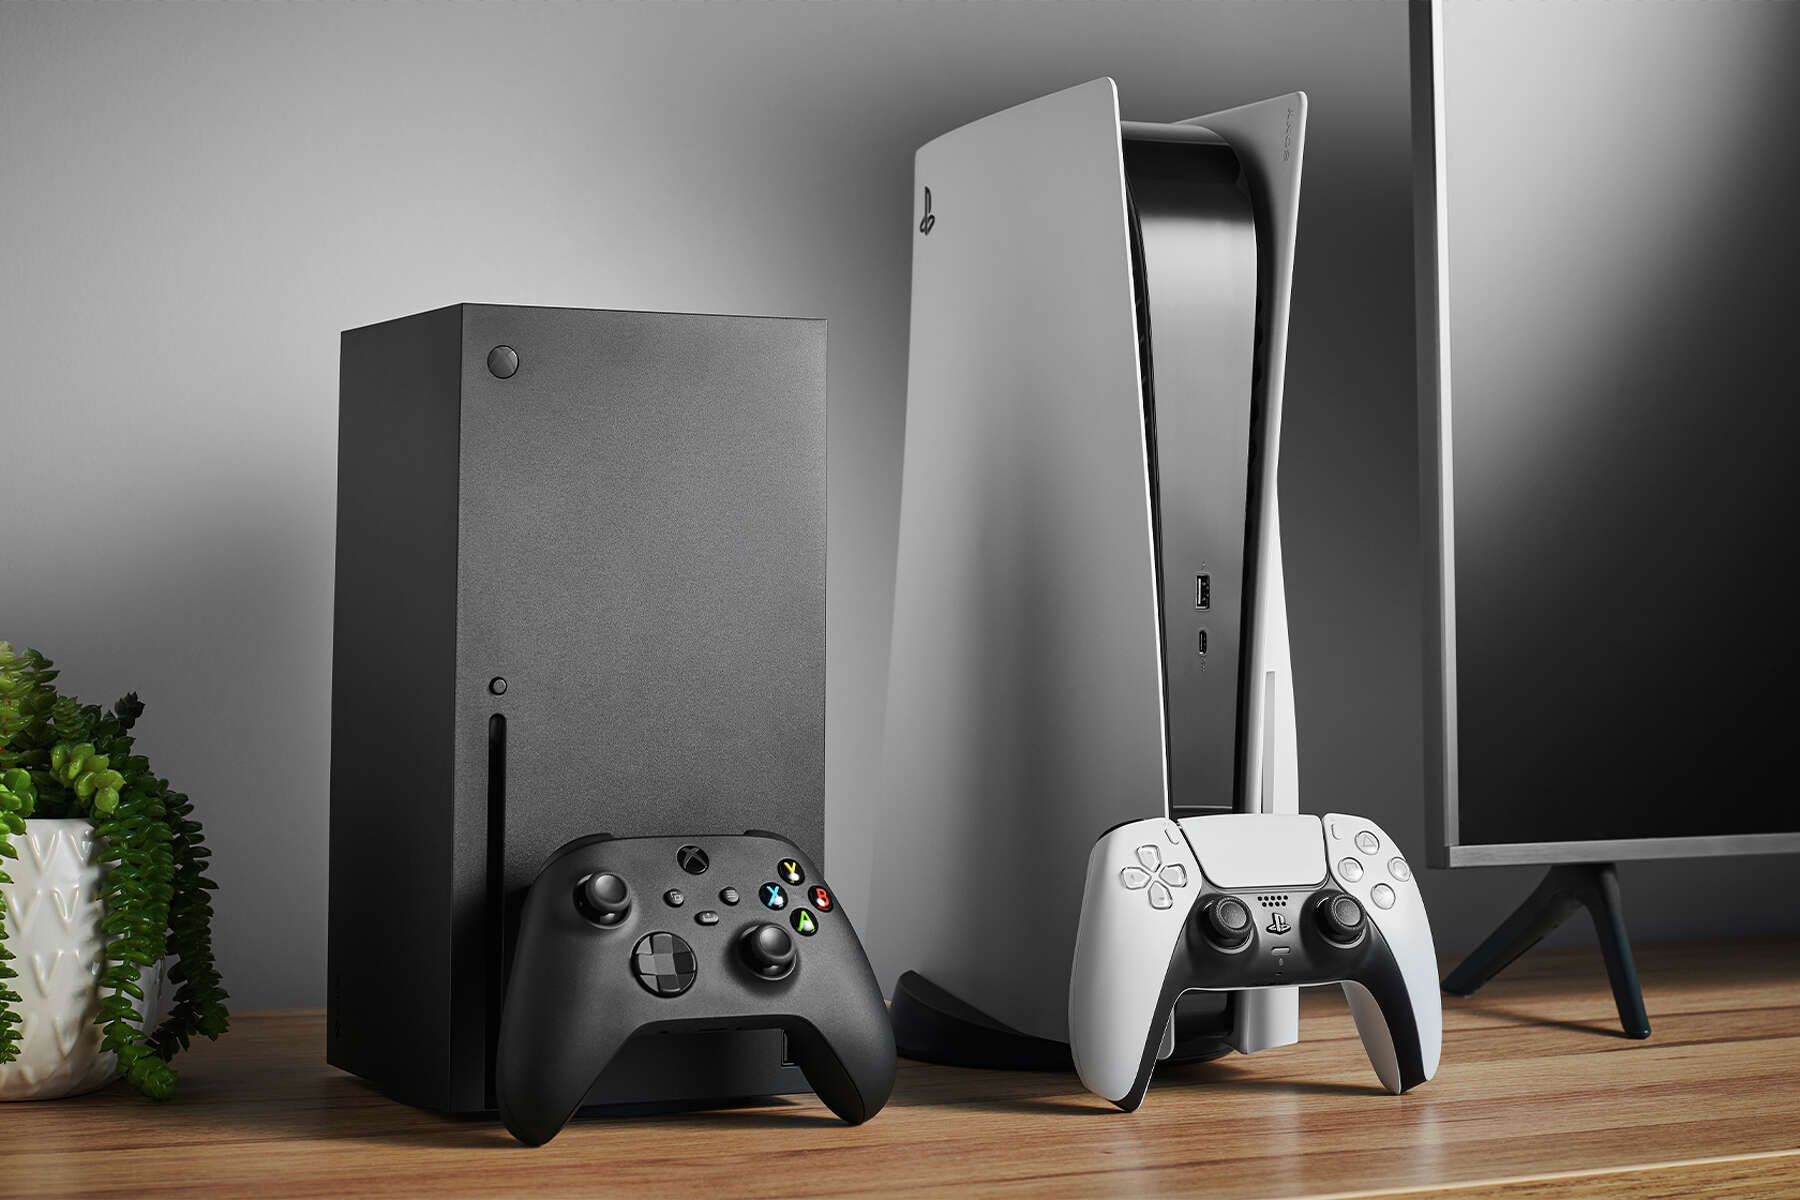 Xbox Series X finally outsold PS5 in Q1 2022